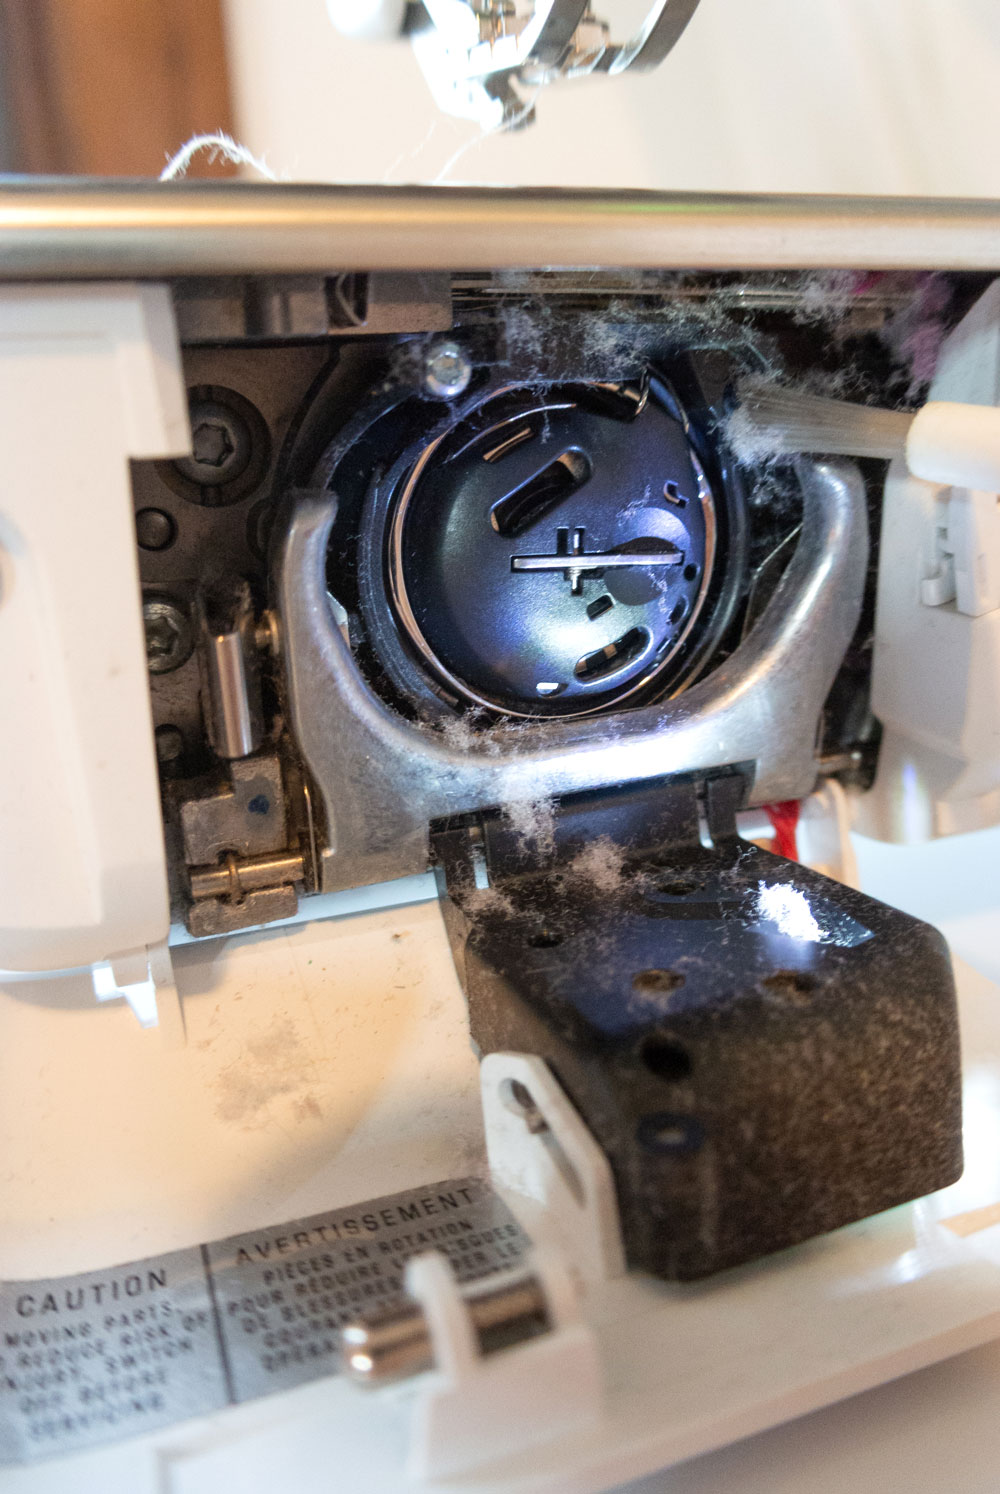 A step by step tutorial on how to clean your sewing machine – you should be doing it more than you think!